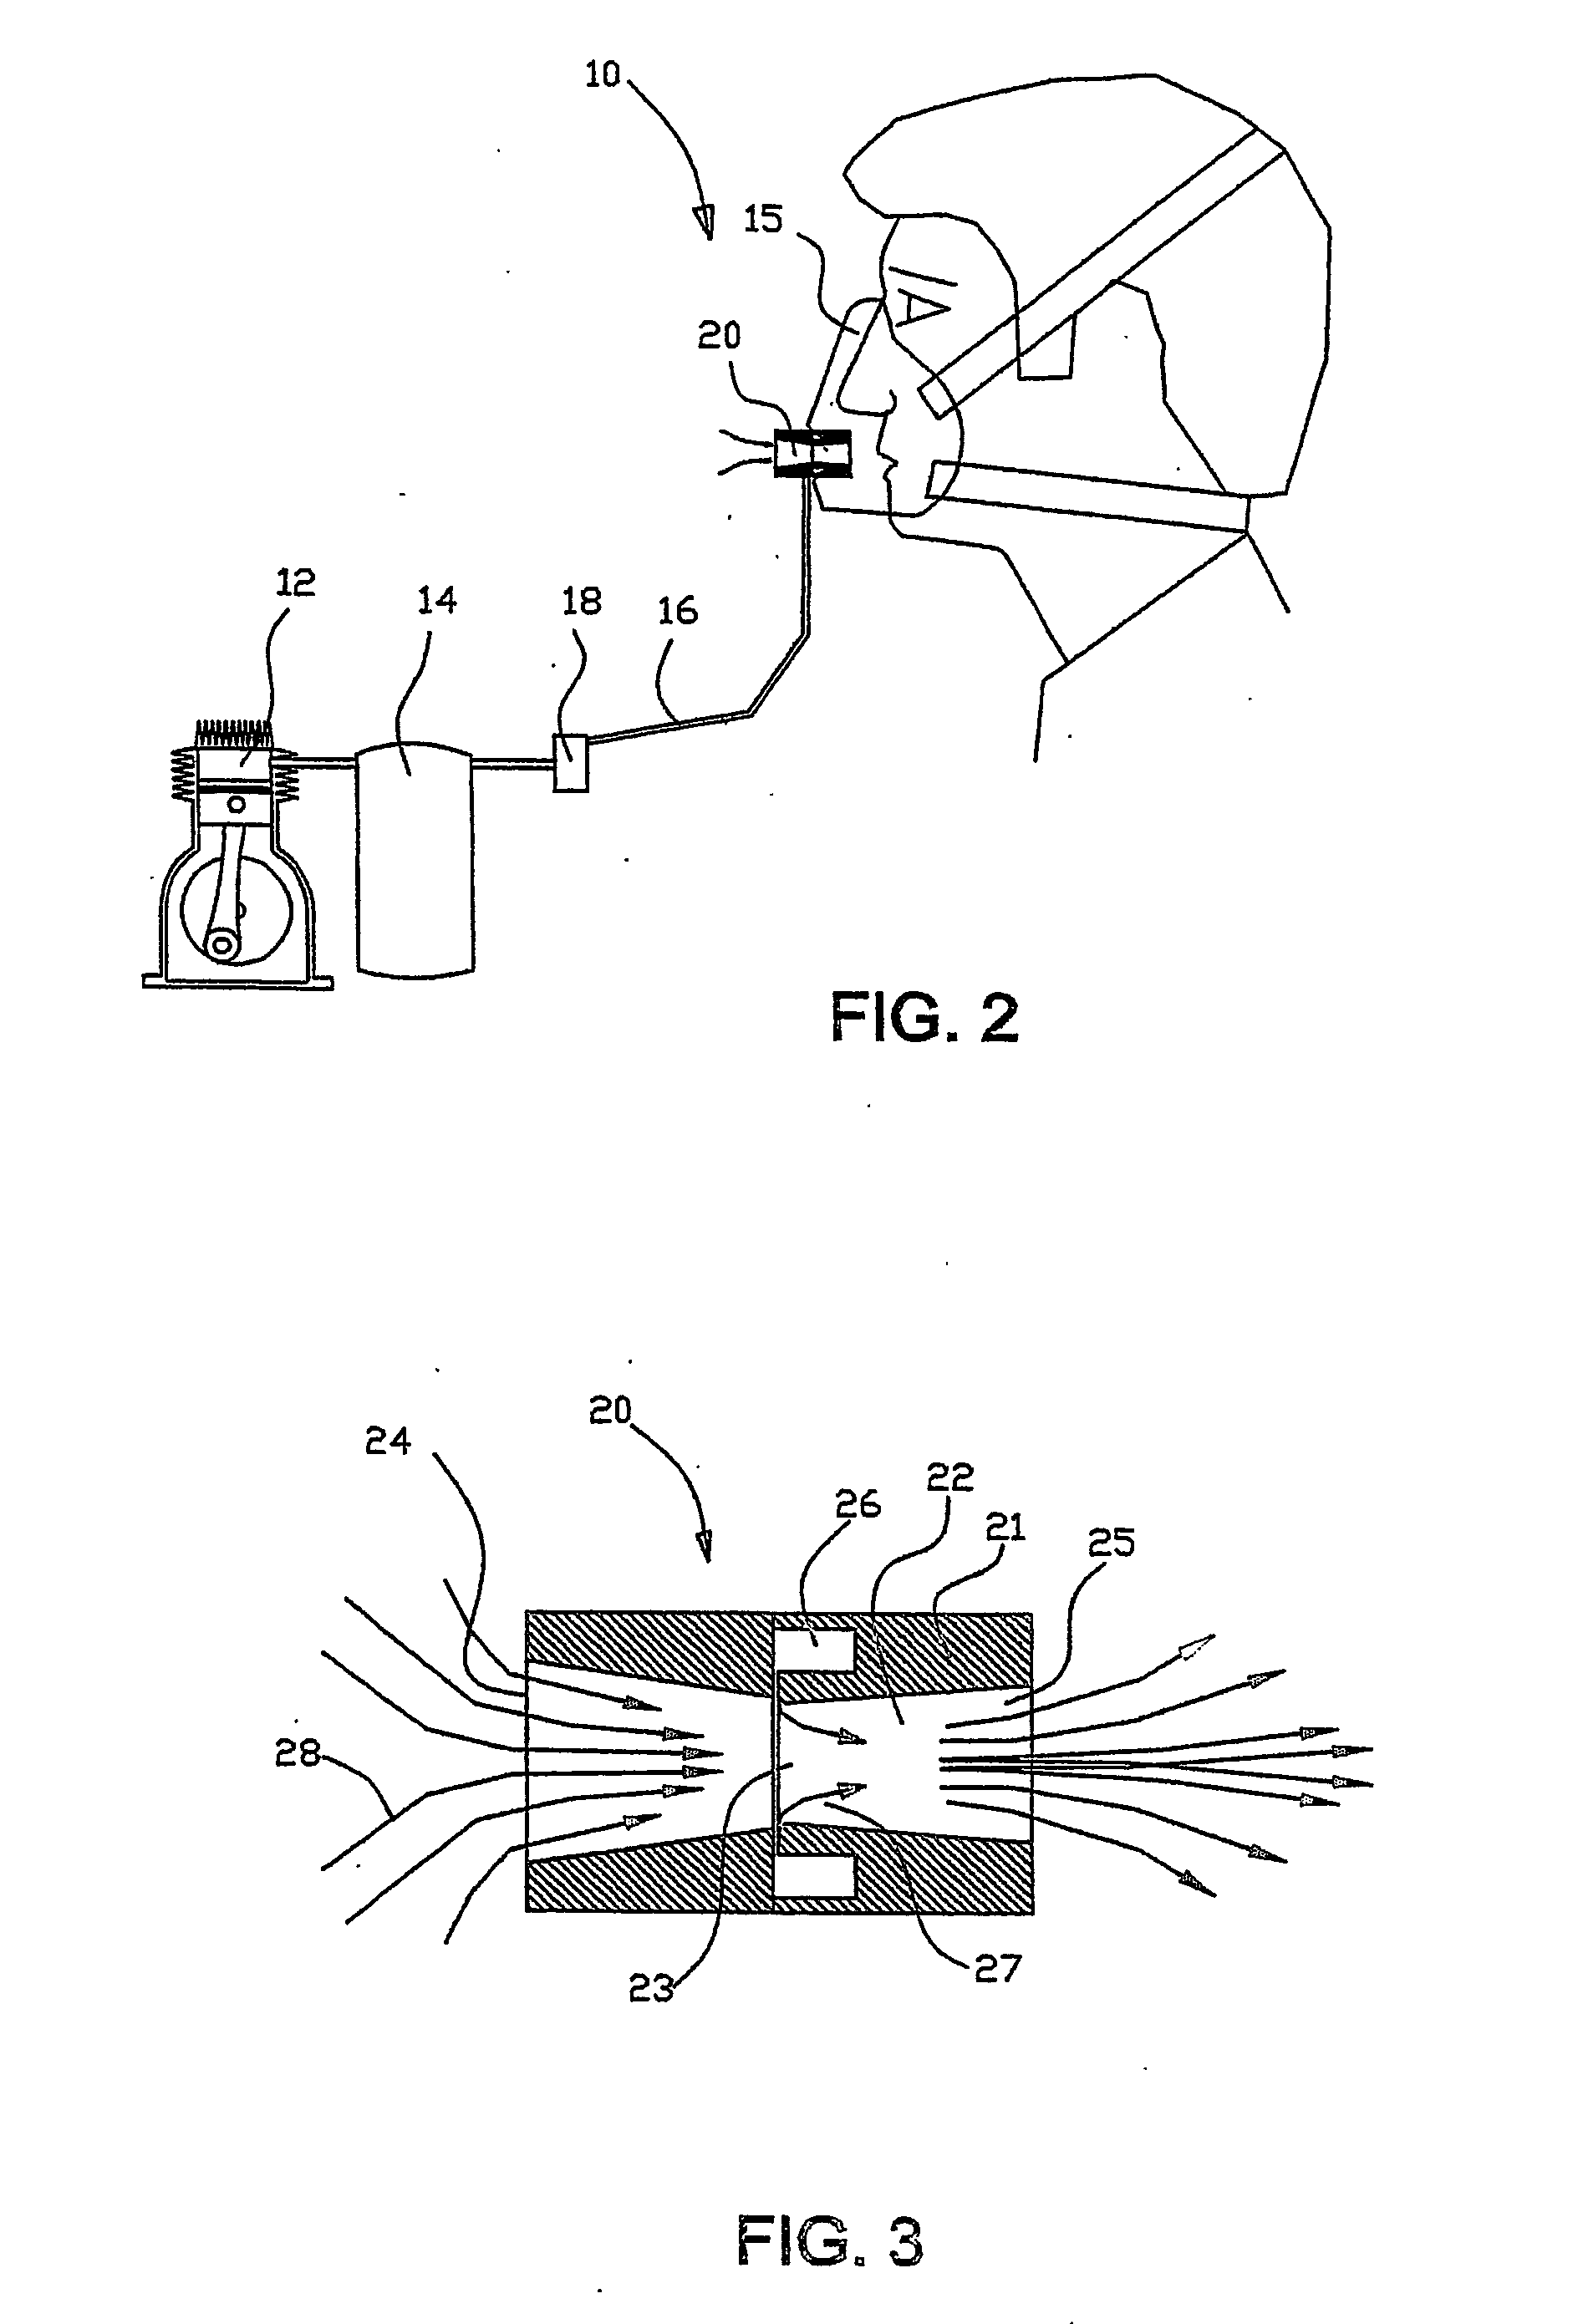 A respiratory aid system and method